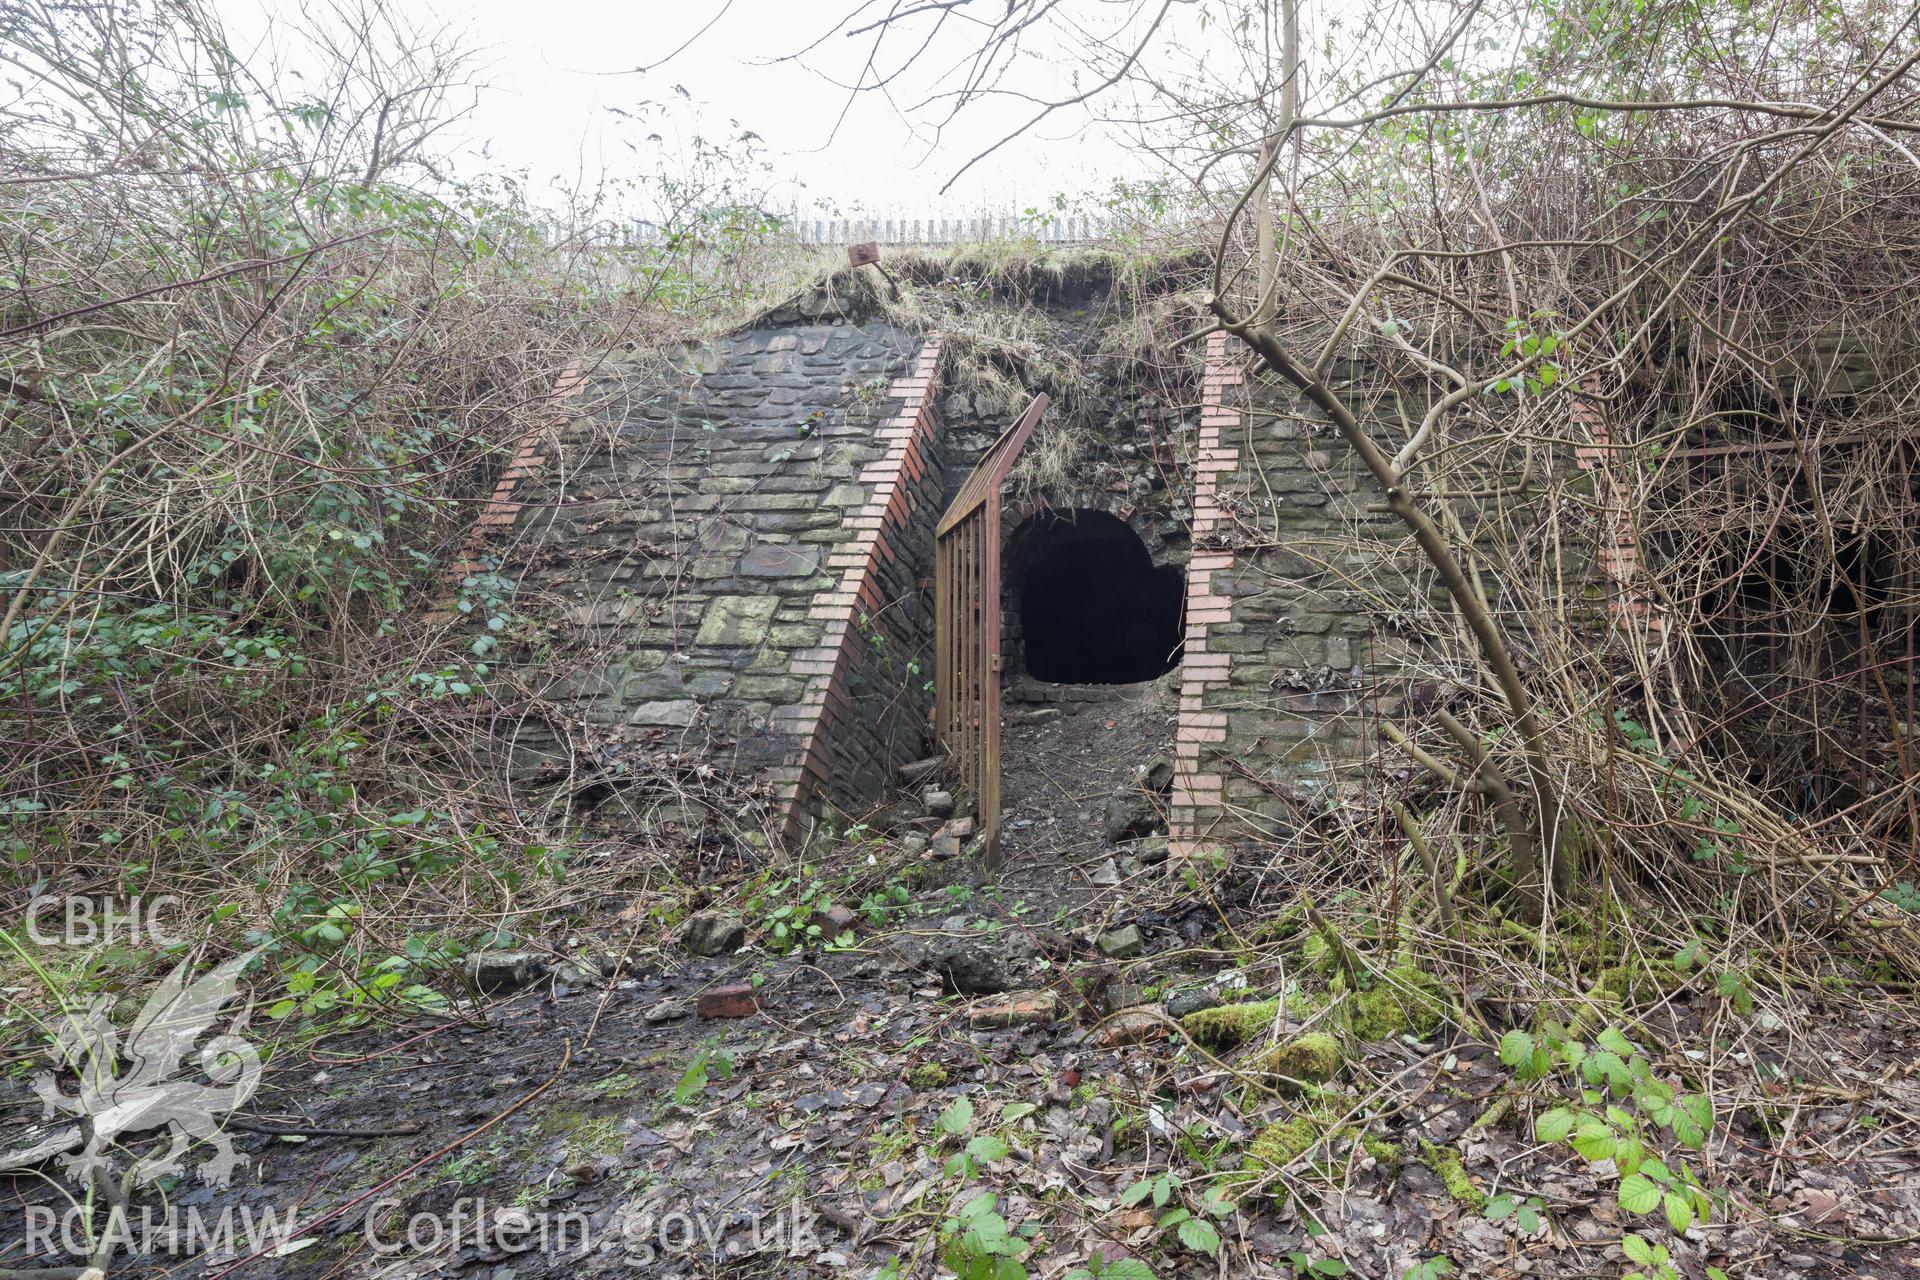 Entrance to the Smiths canal tunnel from the works